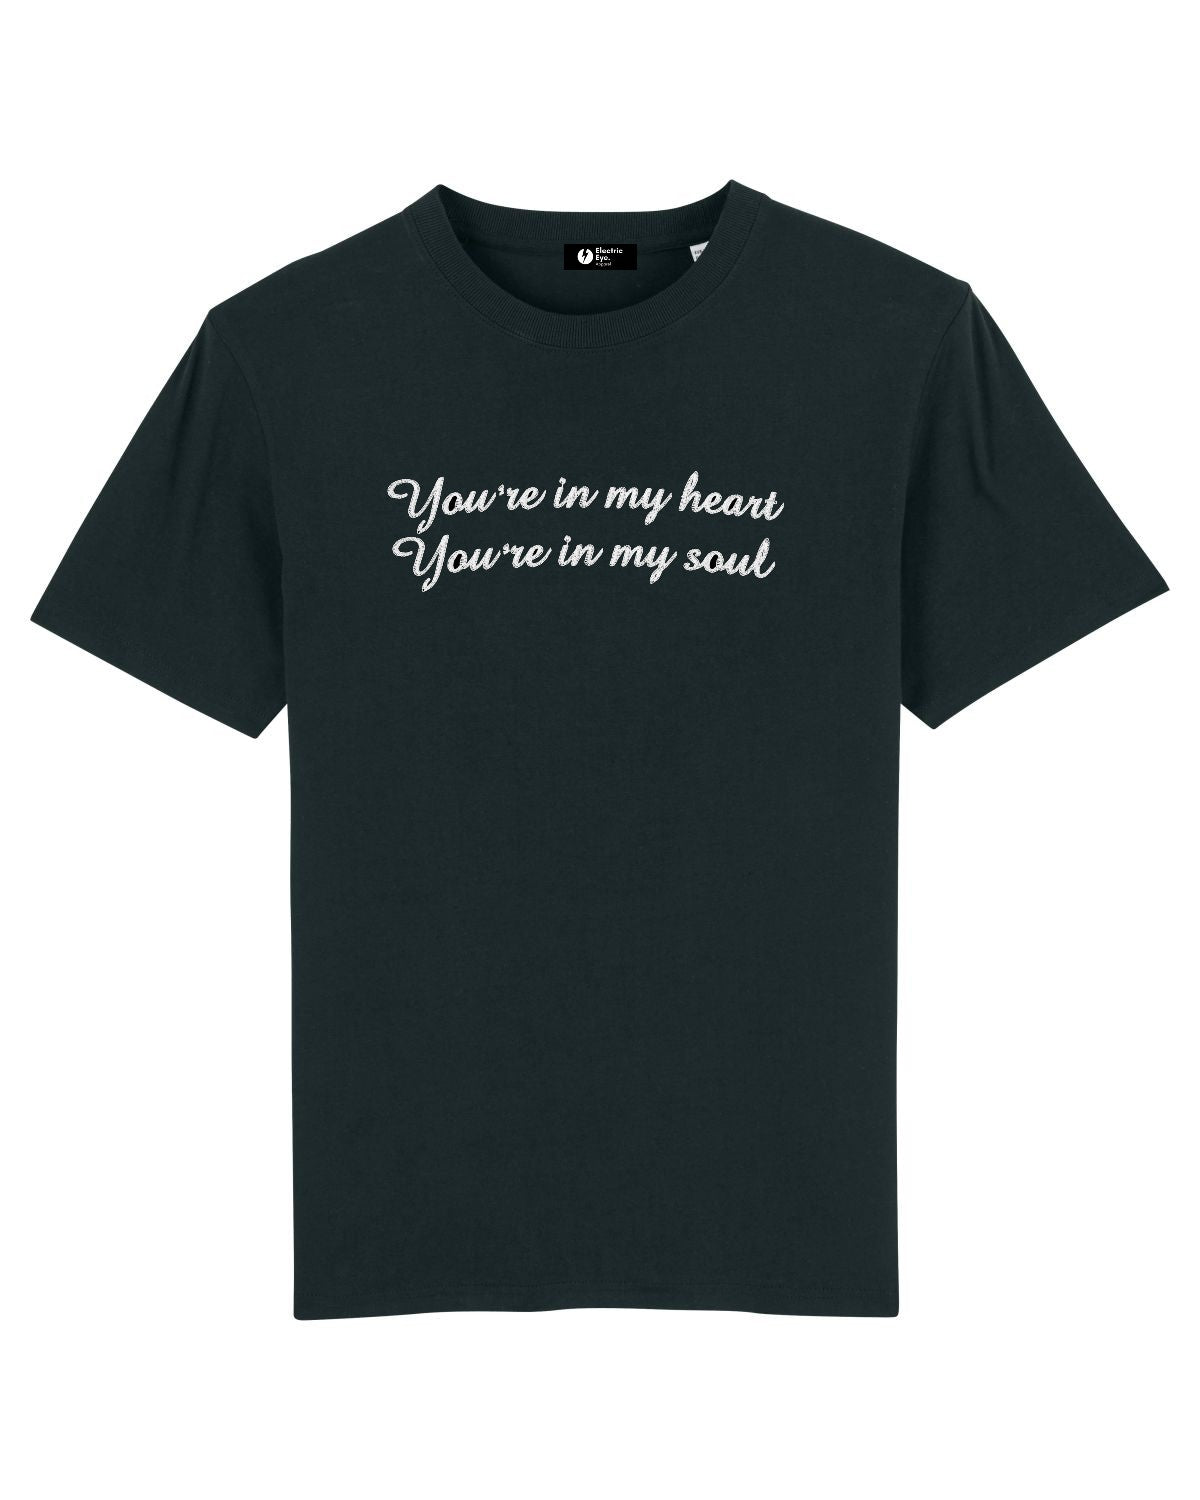 'YOU'RE IN MY HEART, YOU'RE IN MY SOUL' EMBROIDERED 100% ORGANIC COTTON UNISEX FIT 'ROCKER' T-SHIRT